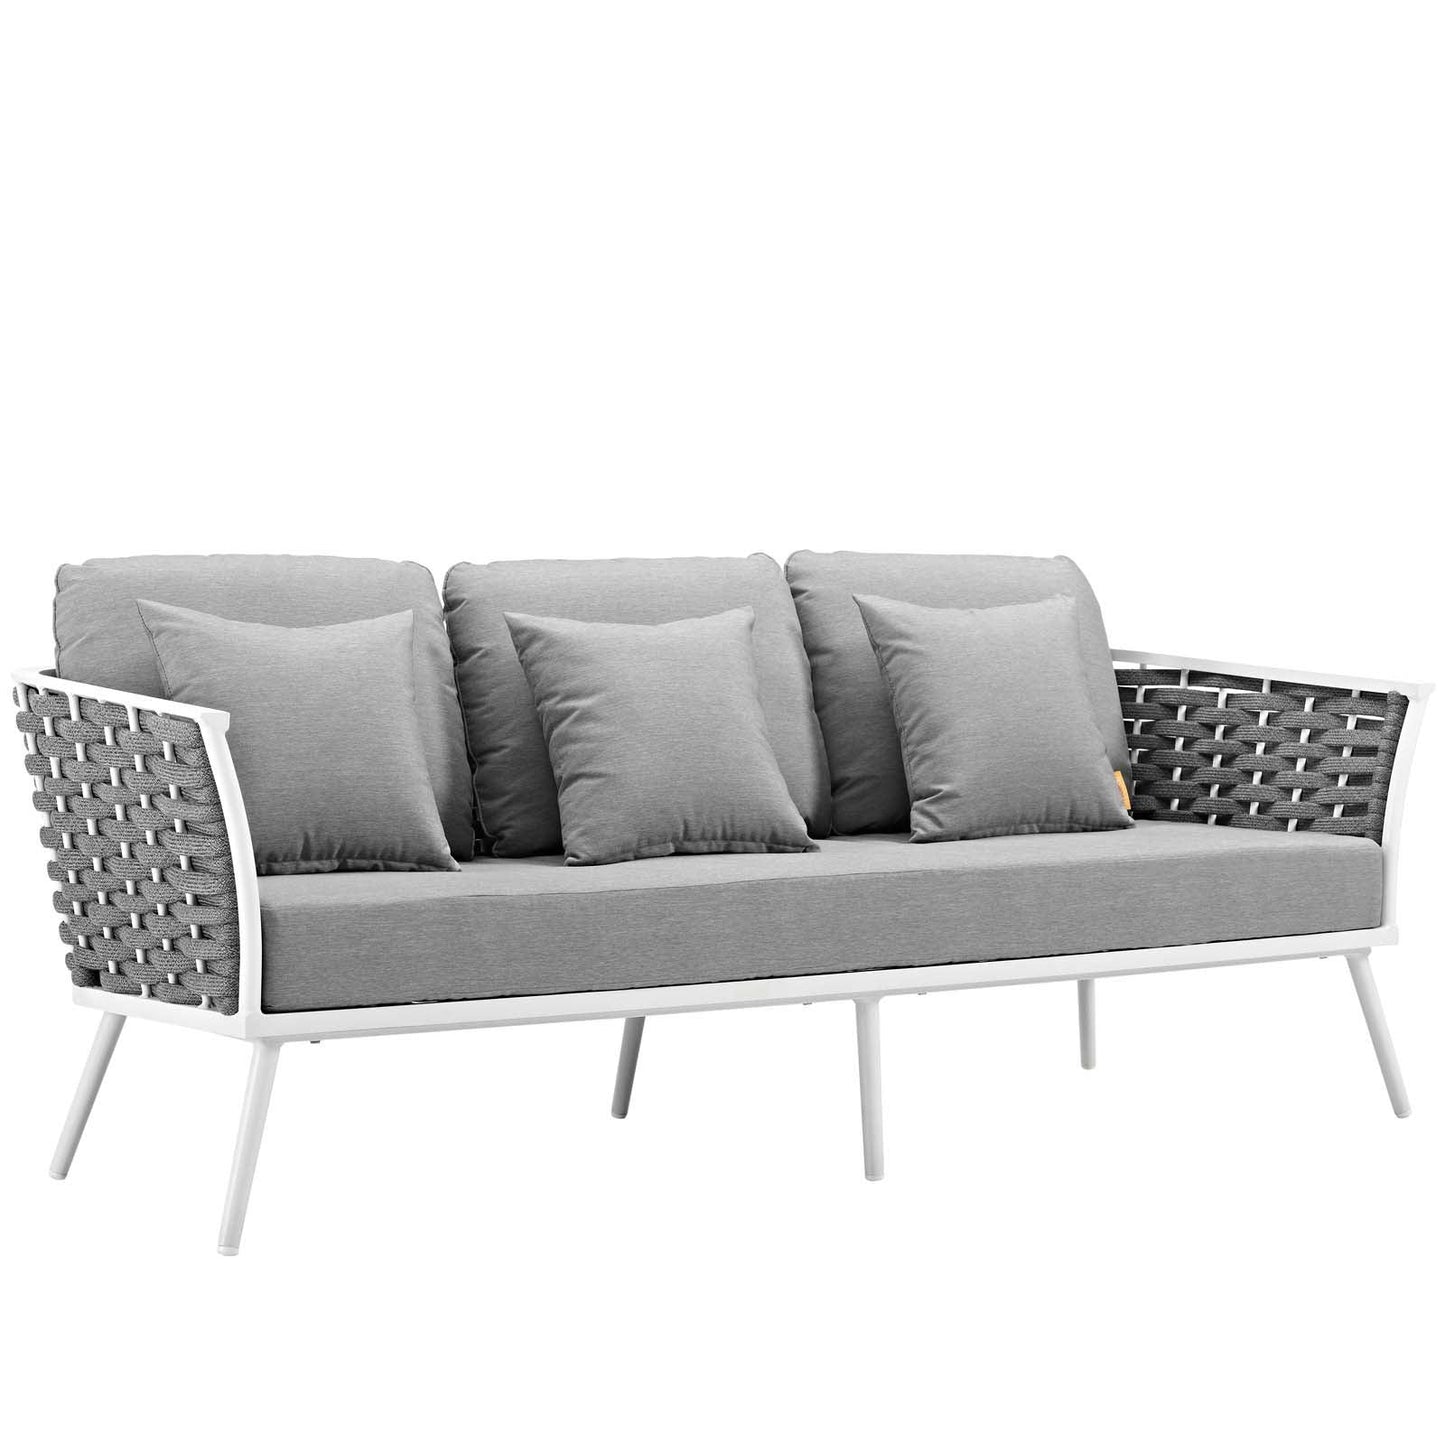 Modway Stance Outdoor Patio Aluminum Sofa FredCo